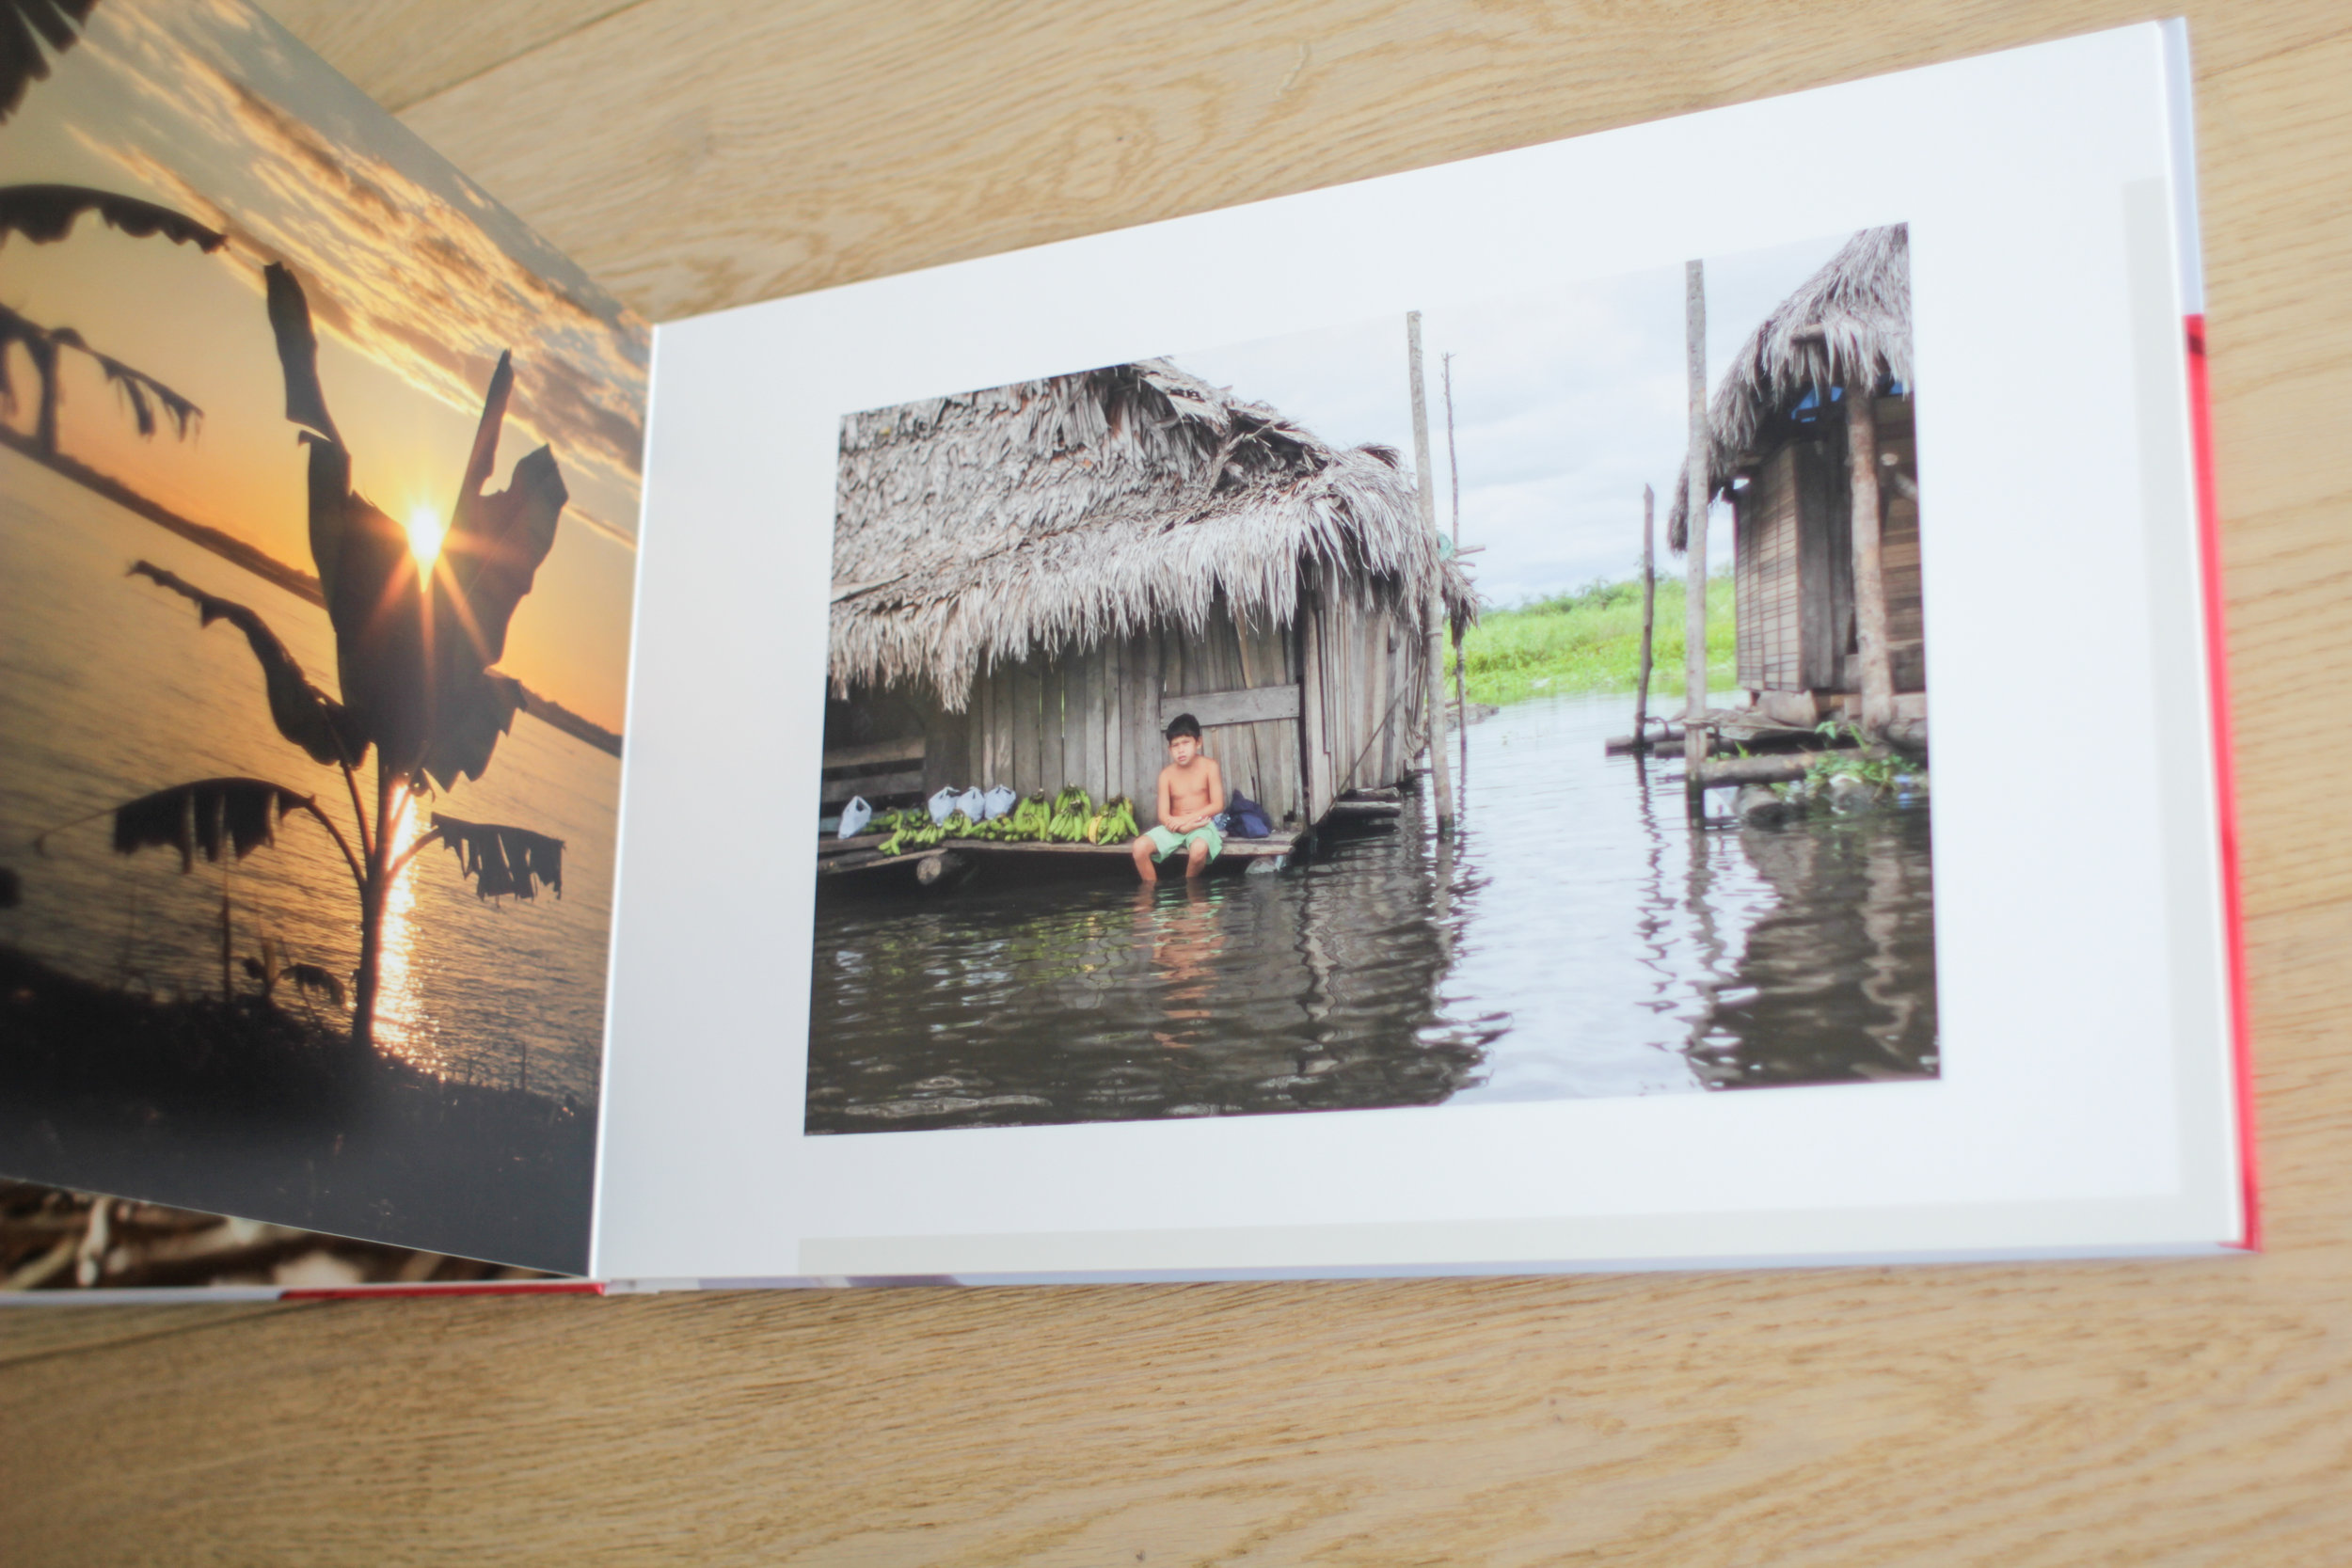 The Amazon in Peru reflected in this Saal Digital UK Photo Book Product Review by Geraint Rowland Photography.